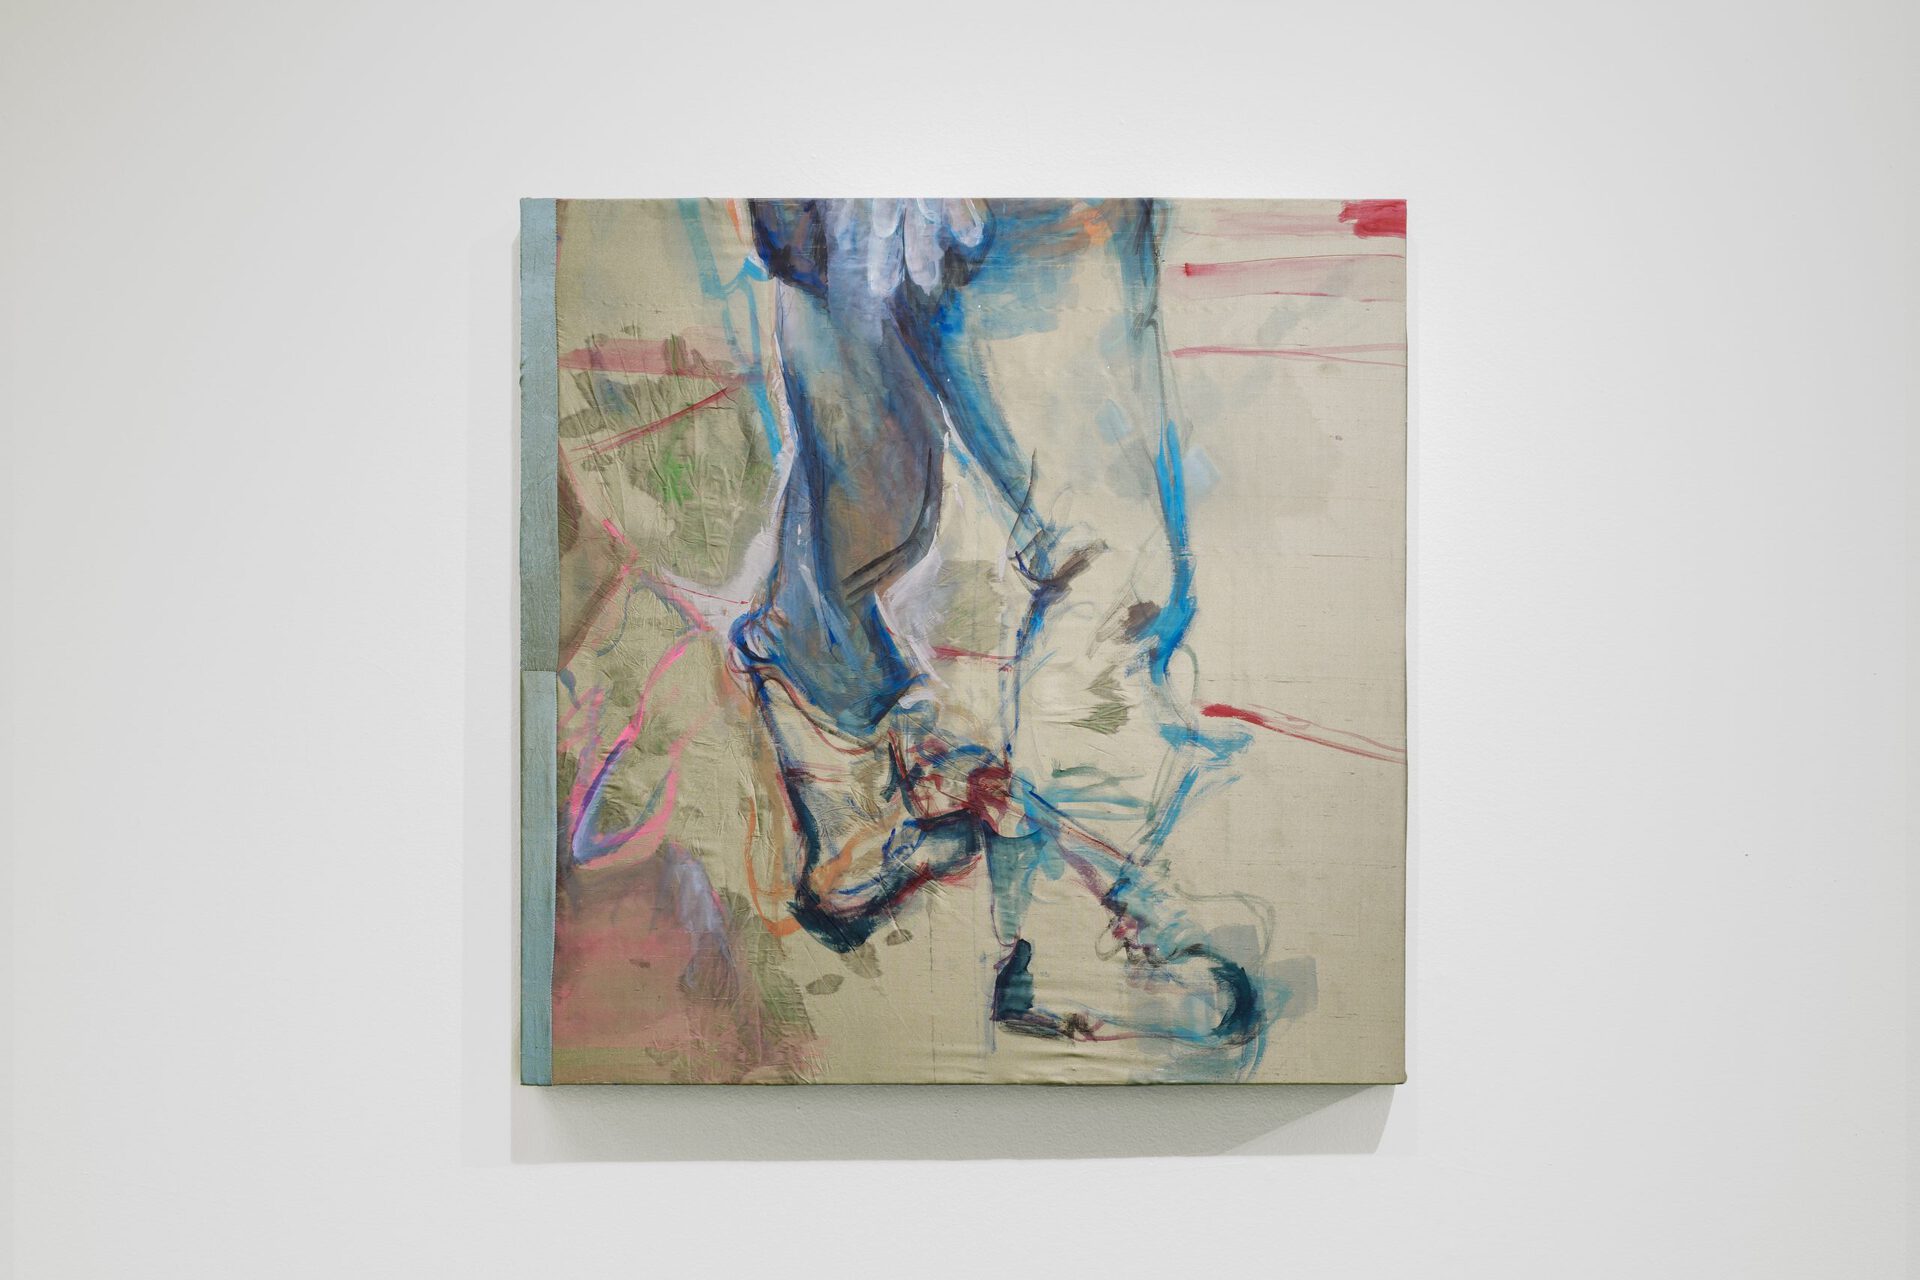 Maggie Crowley, People's Gas Meter Reader, 2021, gouache on silk, 30 x 30 inches